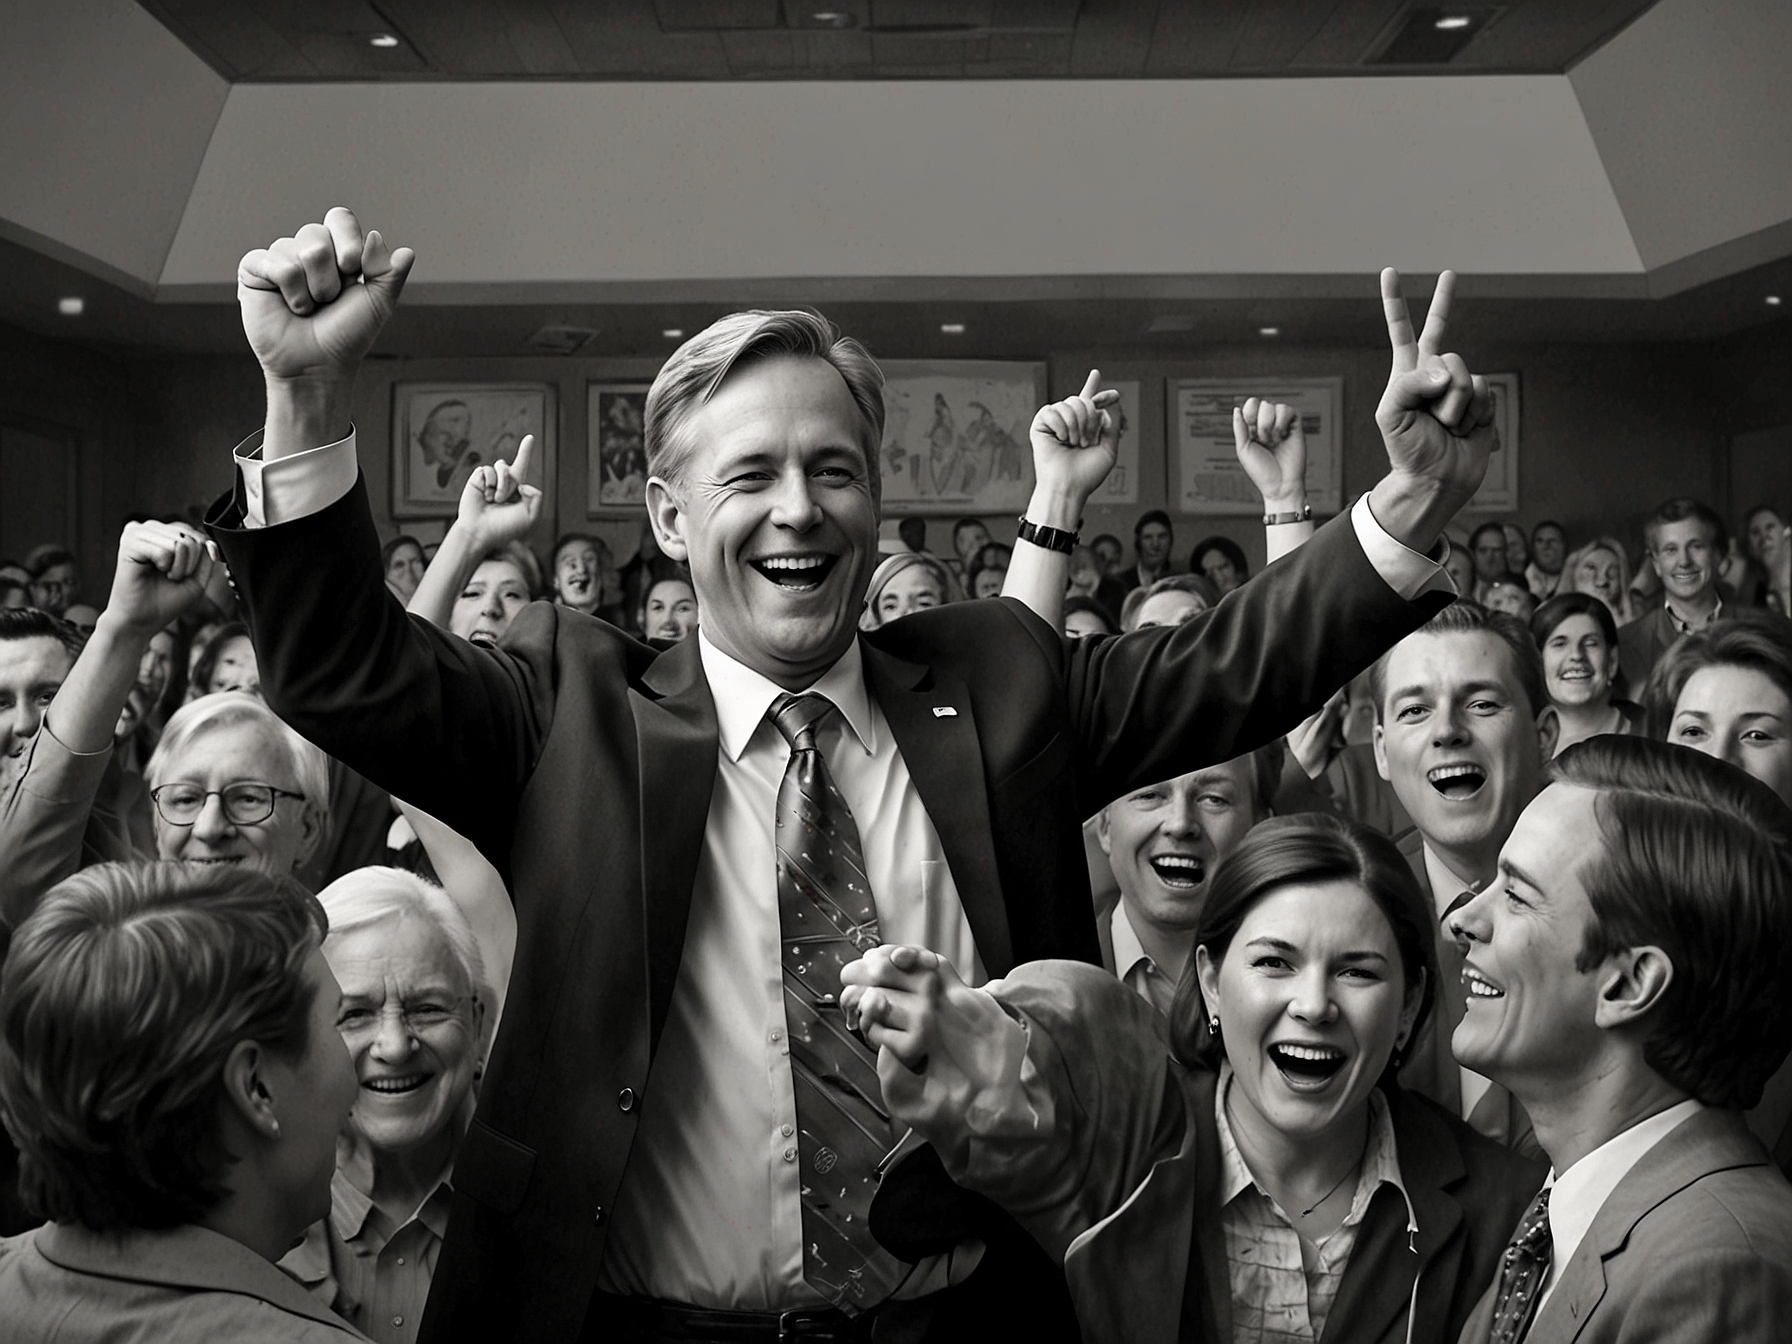 Jeff Crank, the newly elected GOP candidate for Colorado’s 5th District, stands with supporters during his victory speech after defeating incumbent Dave Williams in the primary election.